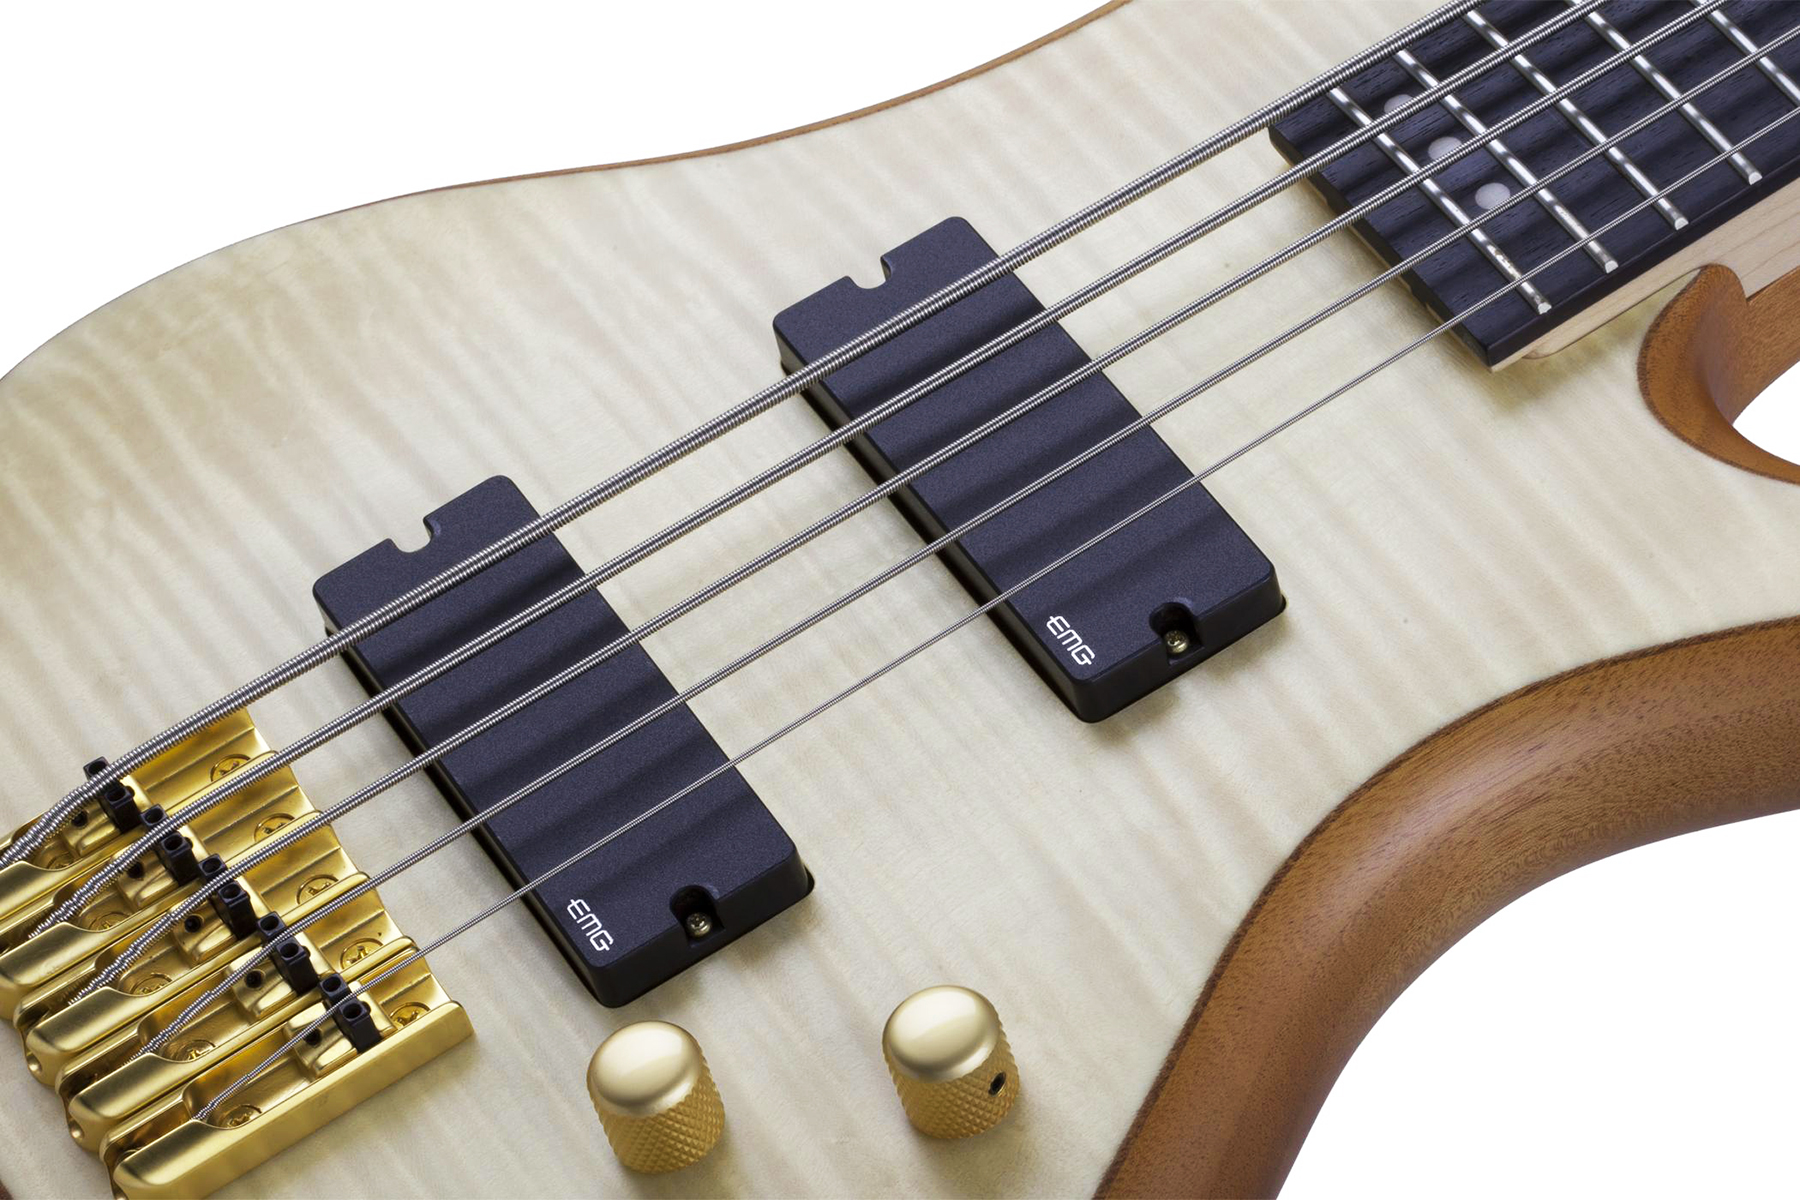 Schecter Stiletto Custom-5 5c Active Emg Rw - Natural Satin - Solid body electric bass - Variation 3